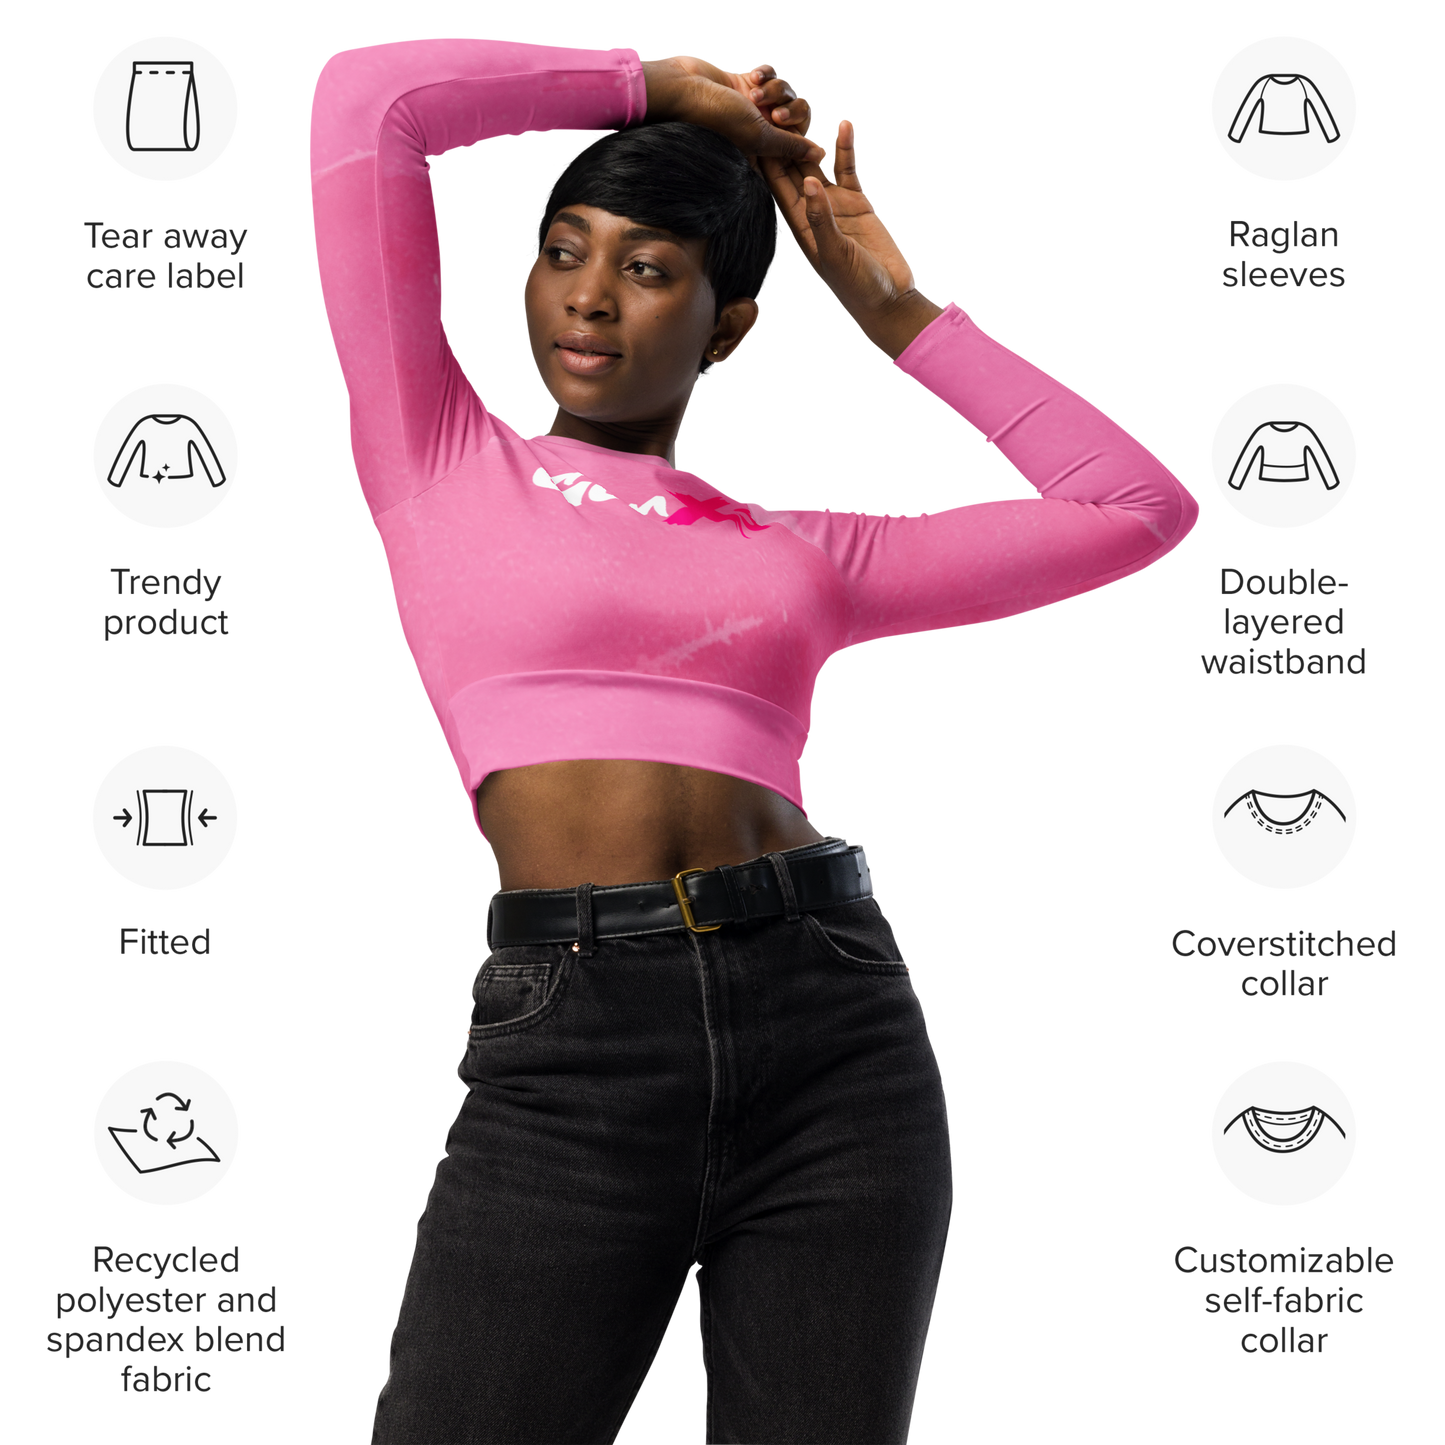 GenXs Pink Recycled long-sleeve crop top